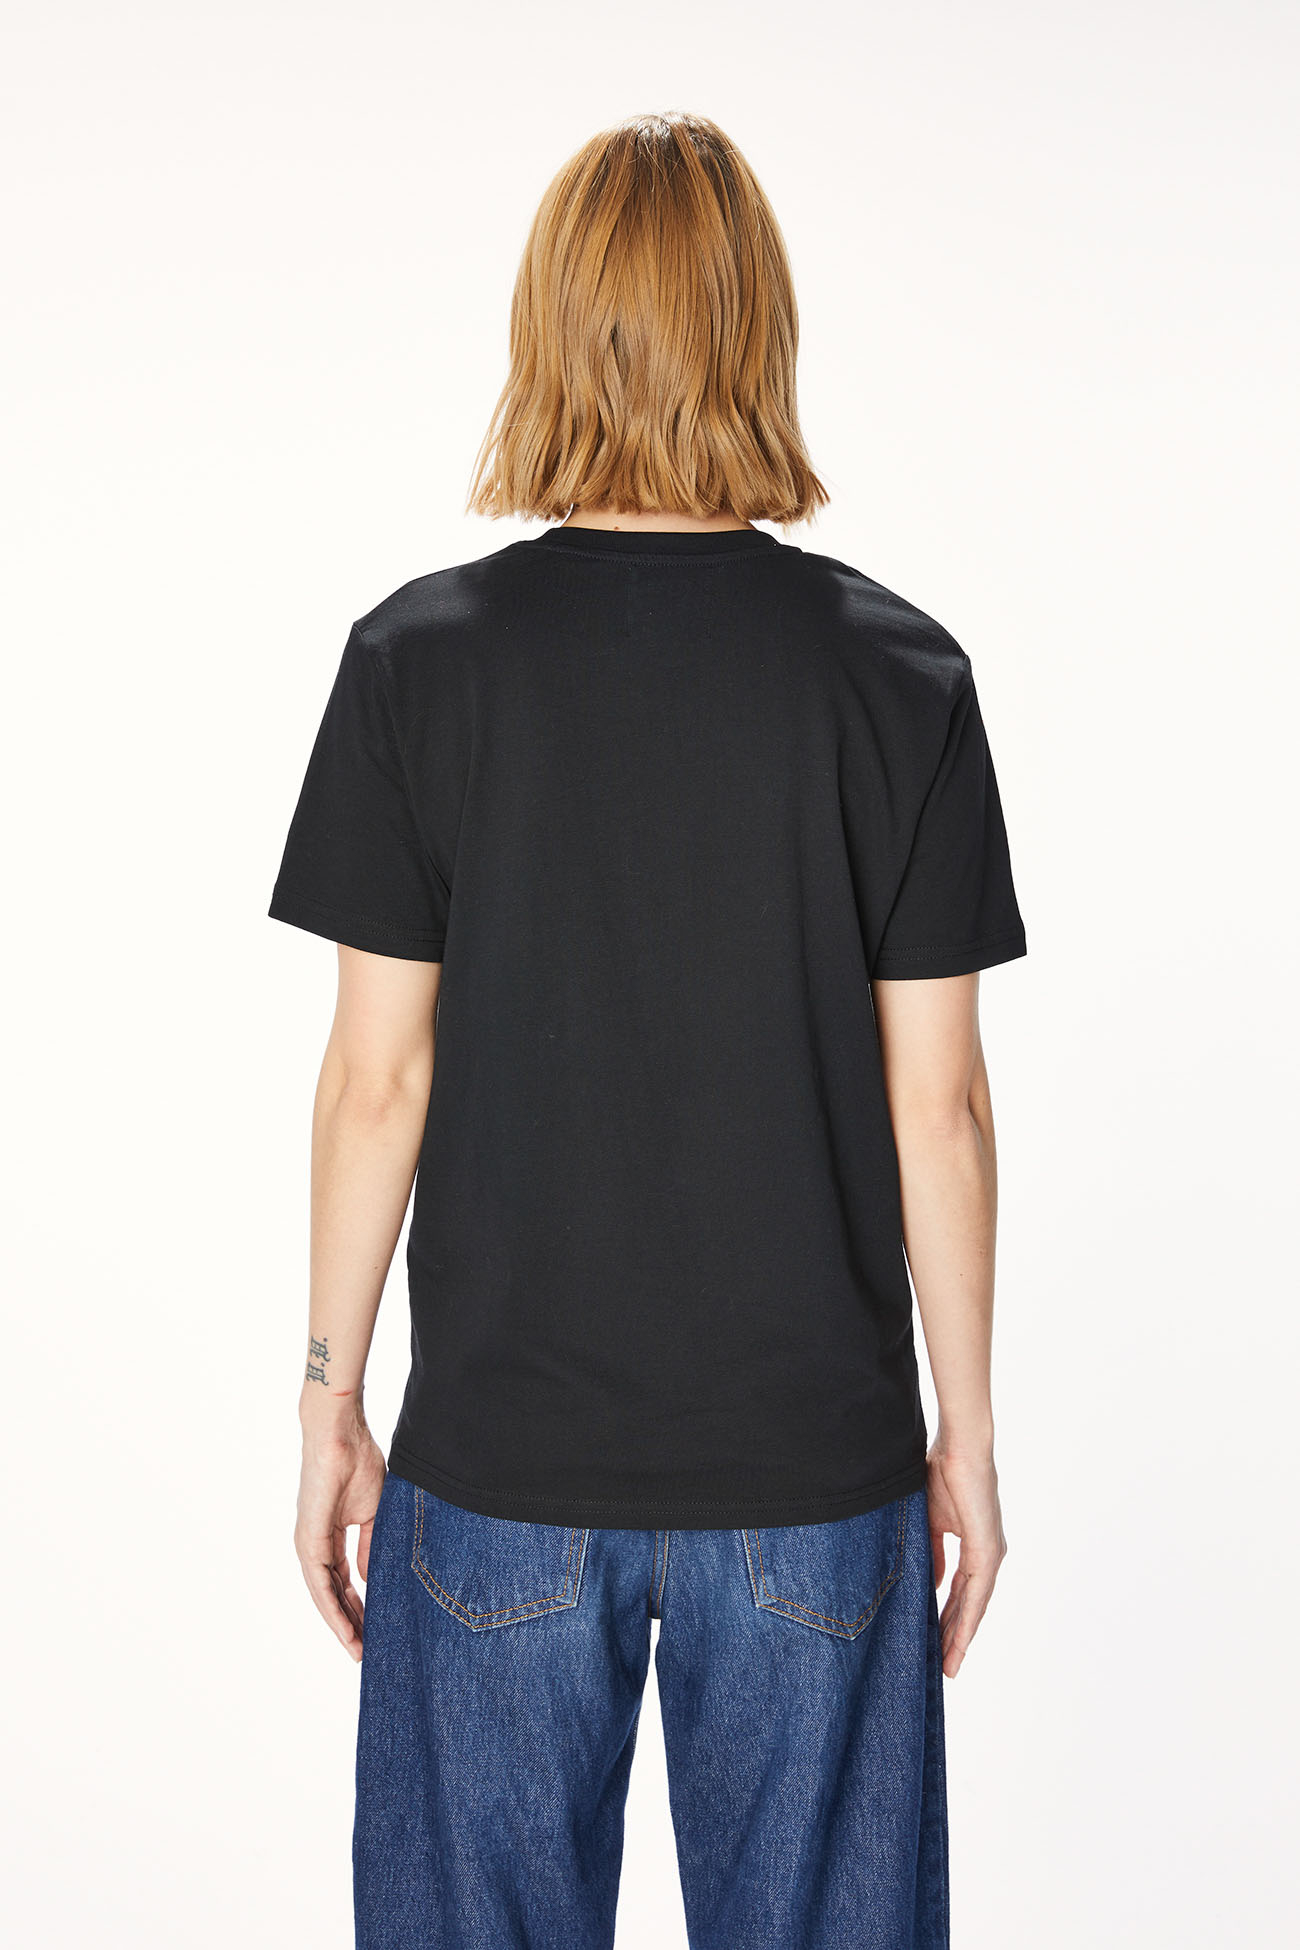 T-SHIRT 7026 MADE IN COTTON  - BLACK - OOF WEAR